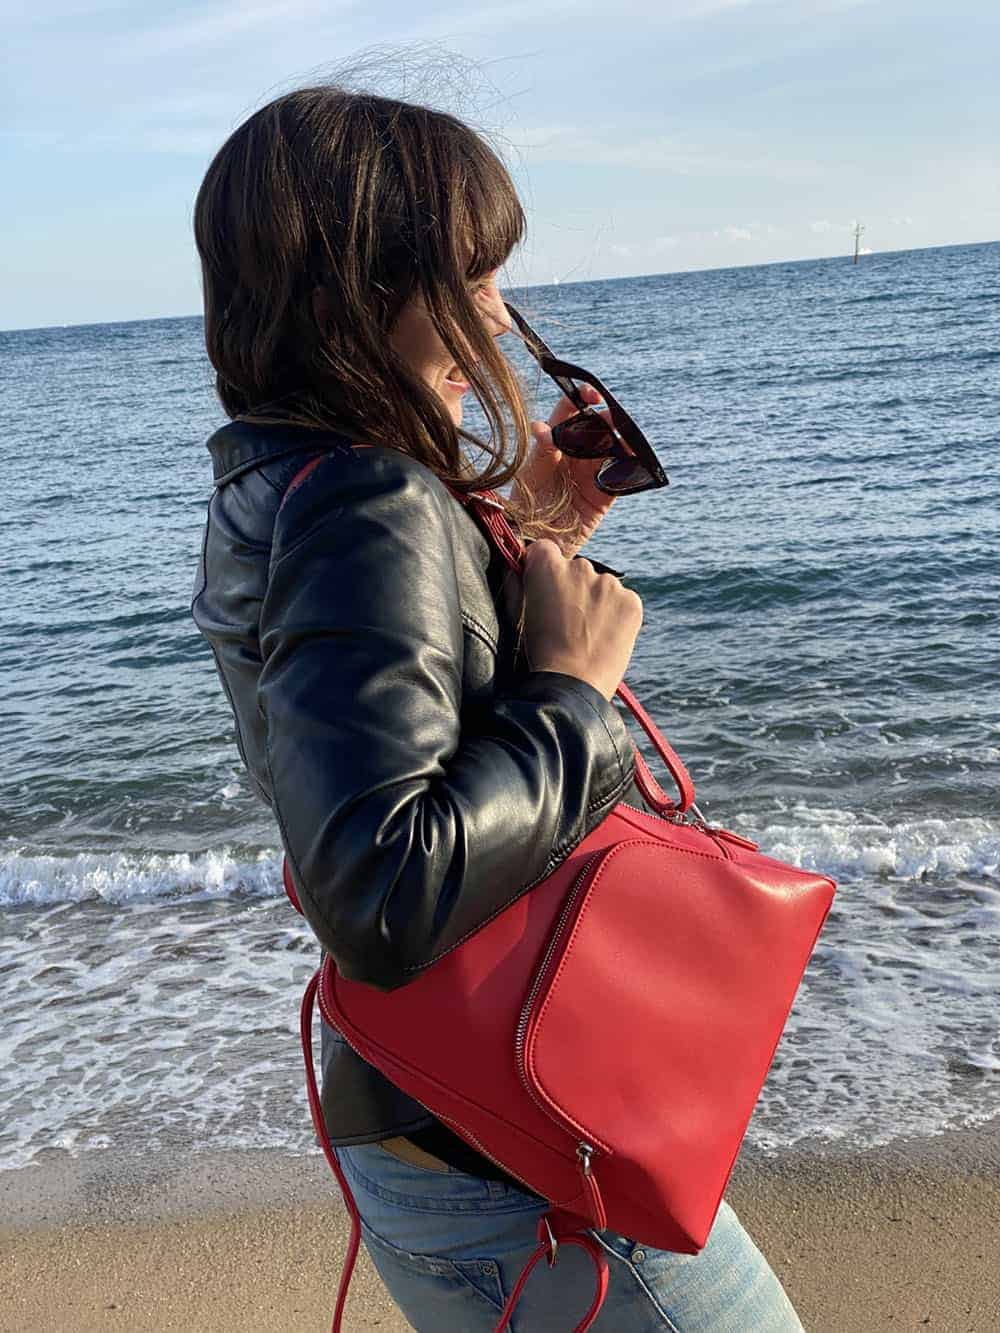 I'm holding the red vegan leather backpack from Doshi on the beach in front of the sea